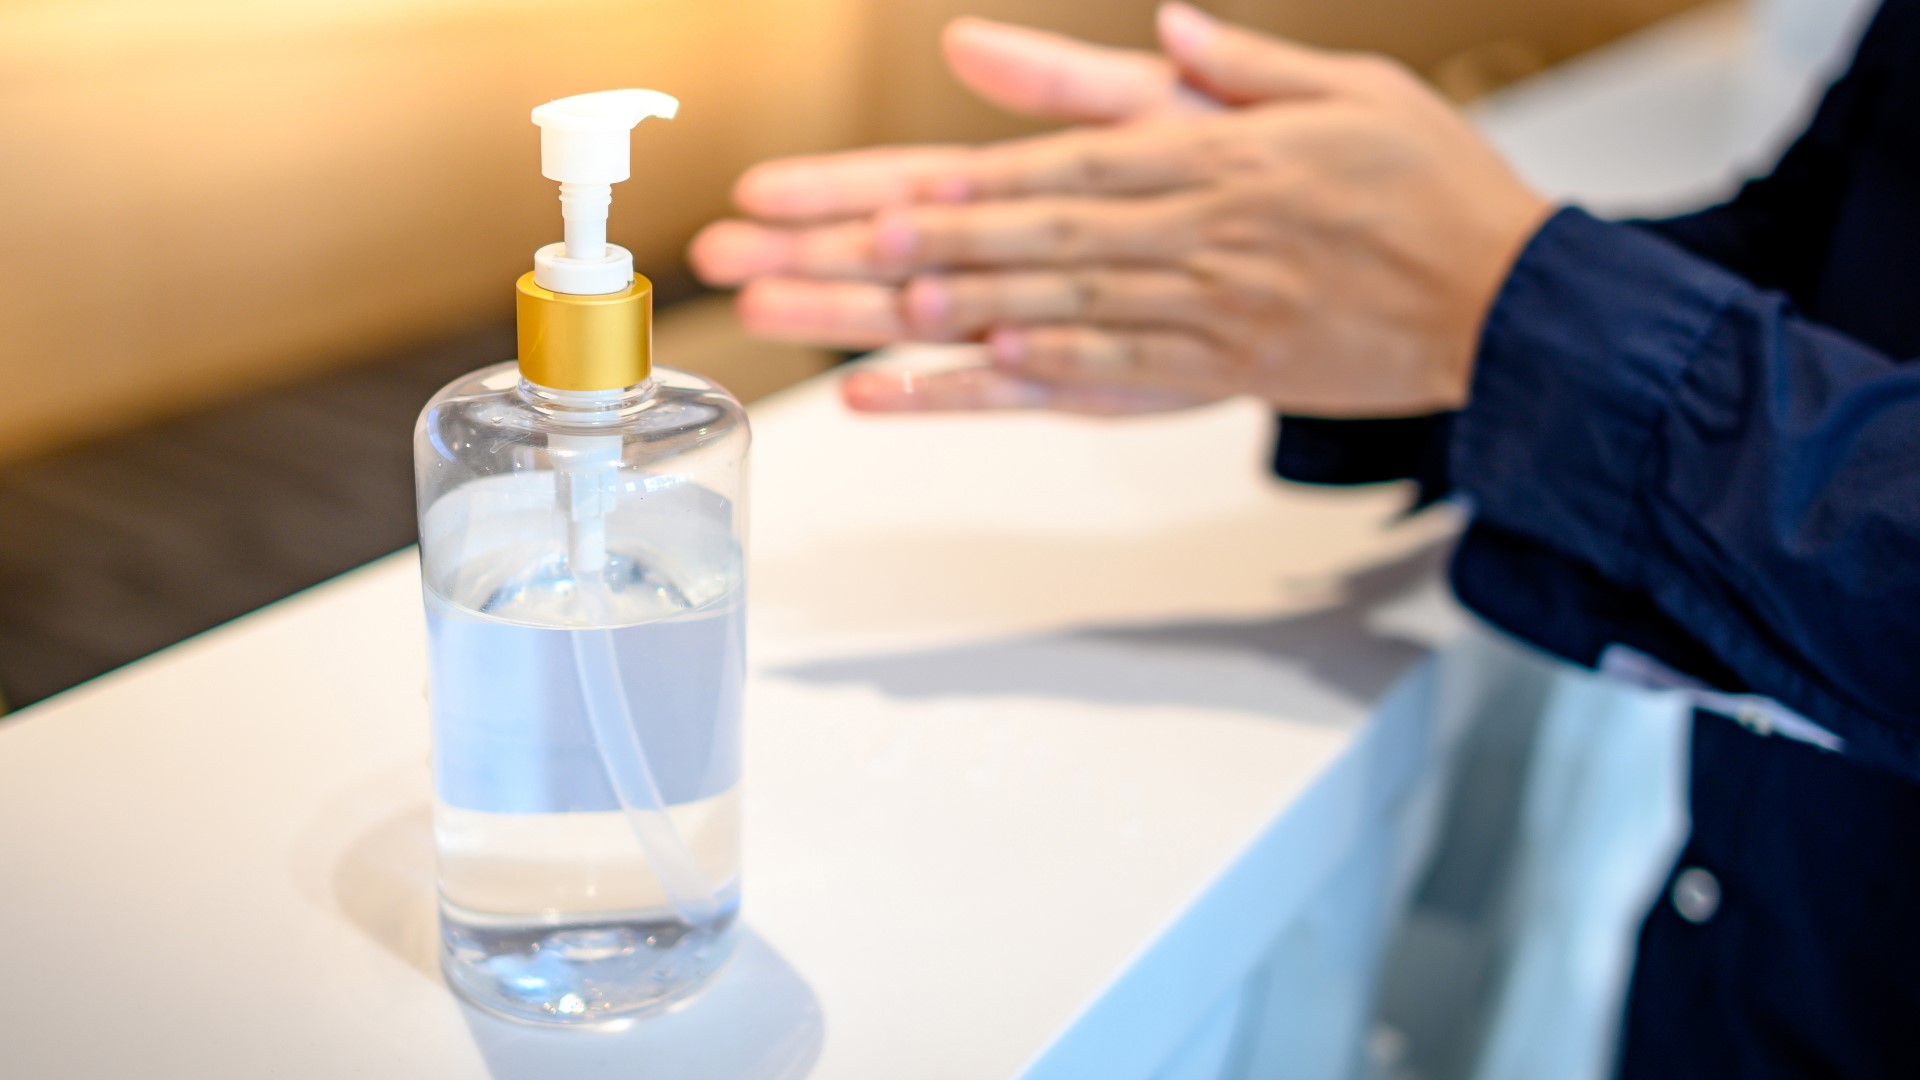 Having a hard time finding hand sanitizer or cleaning wipes? Head to your pantry and make your own with these simple steps.